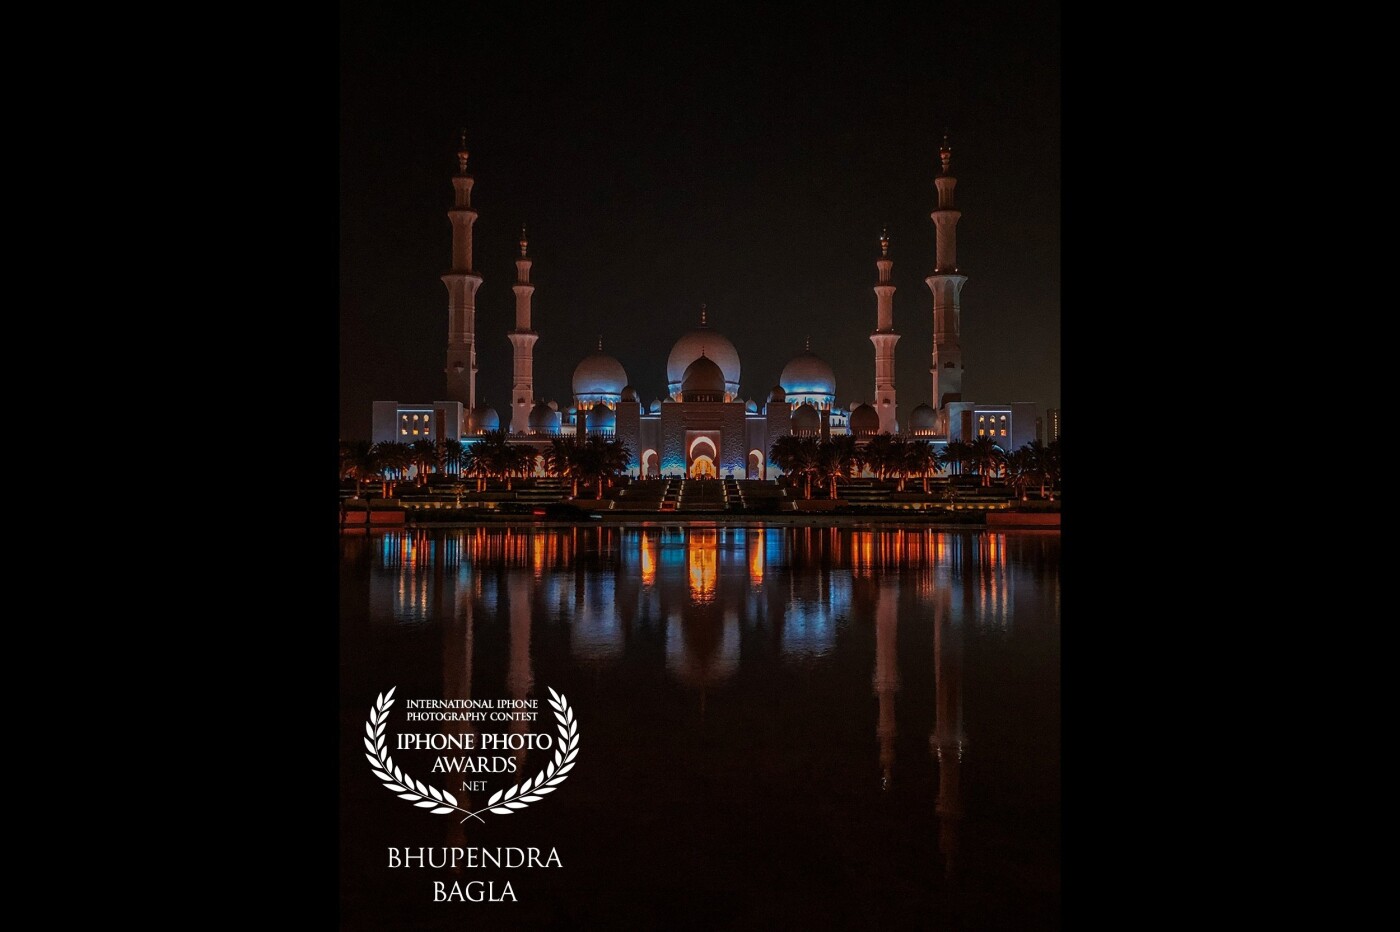 This was shot in the night at Abu Dhabi. The lightings of the Sheikh Zayed Mosque and its reflections on the water body looked quite mesmerizing. 